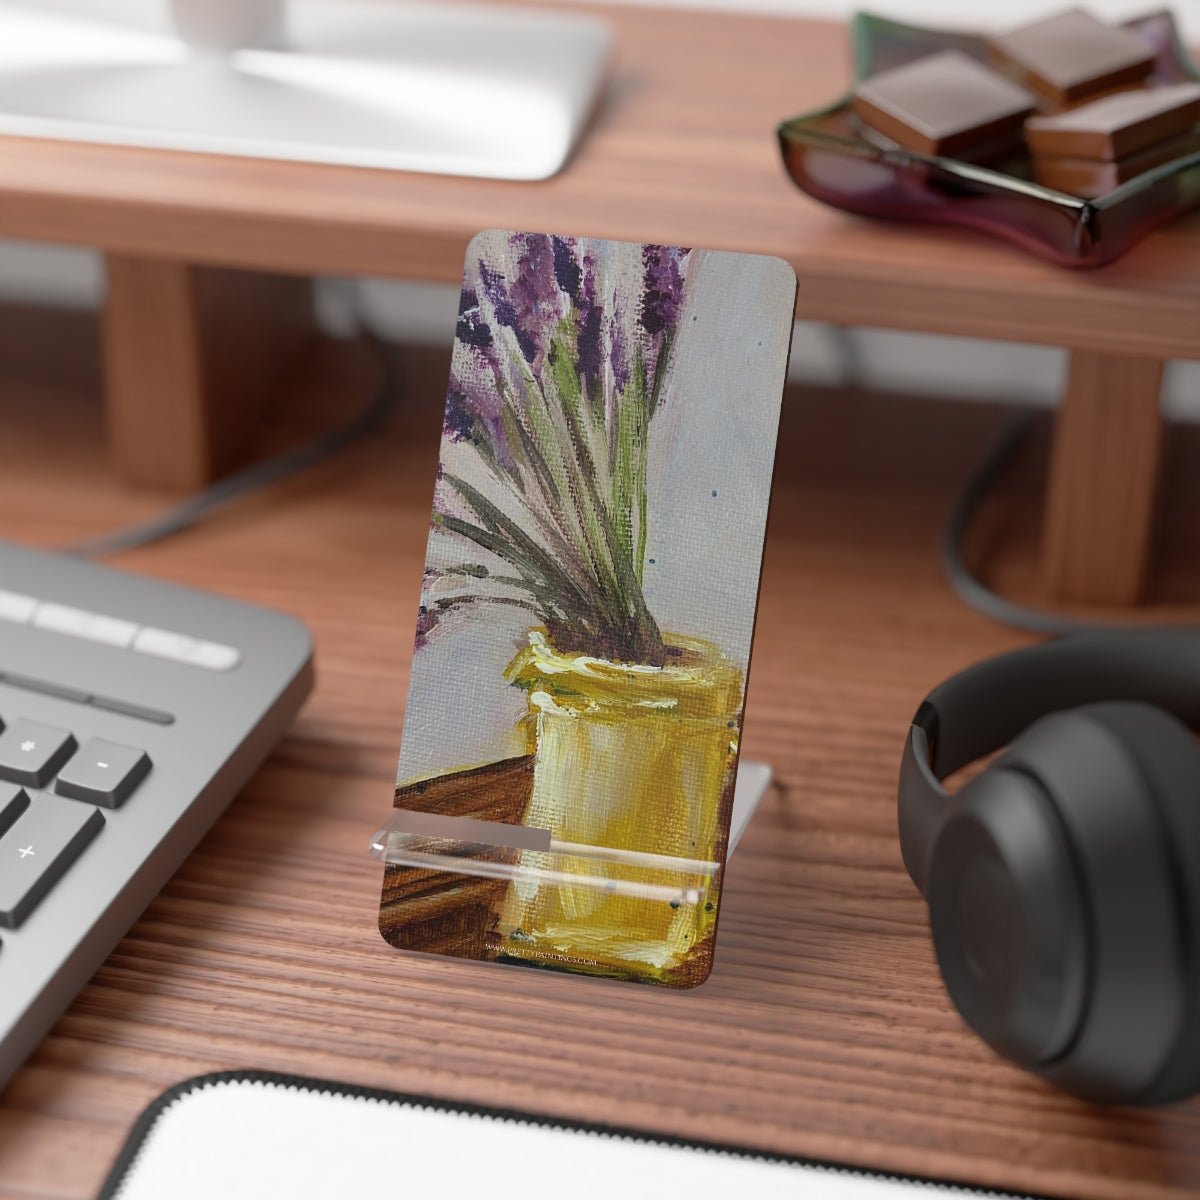 Lavender in a Yellow Pitcher Phone Stand